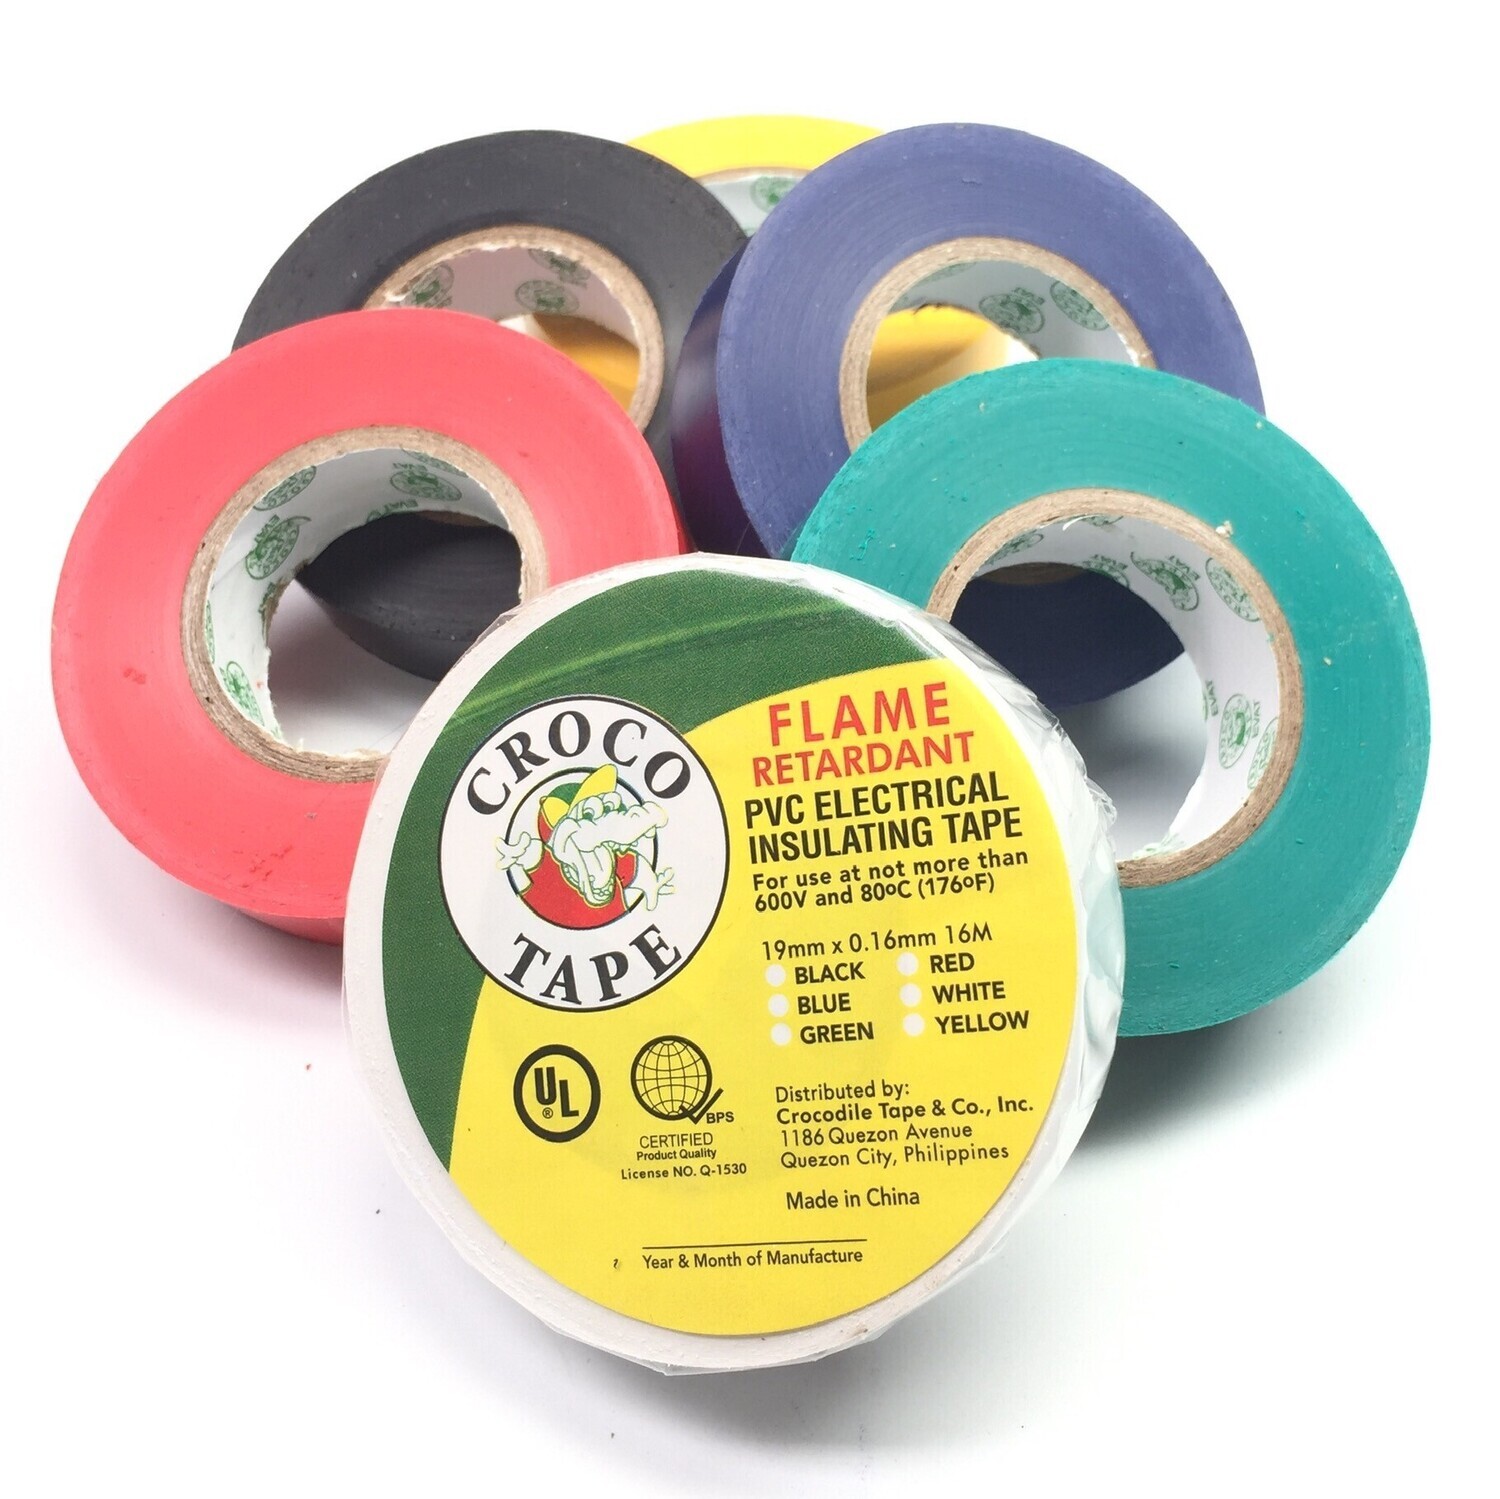 Croco Tape PVC Electrical Insulating Tape 16 Meters Fits Cars, Trucks, Motorcycles